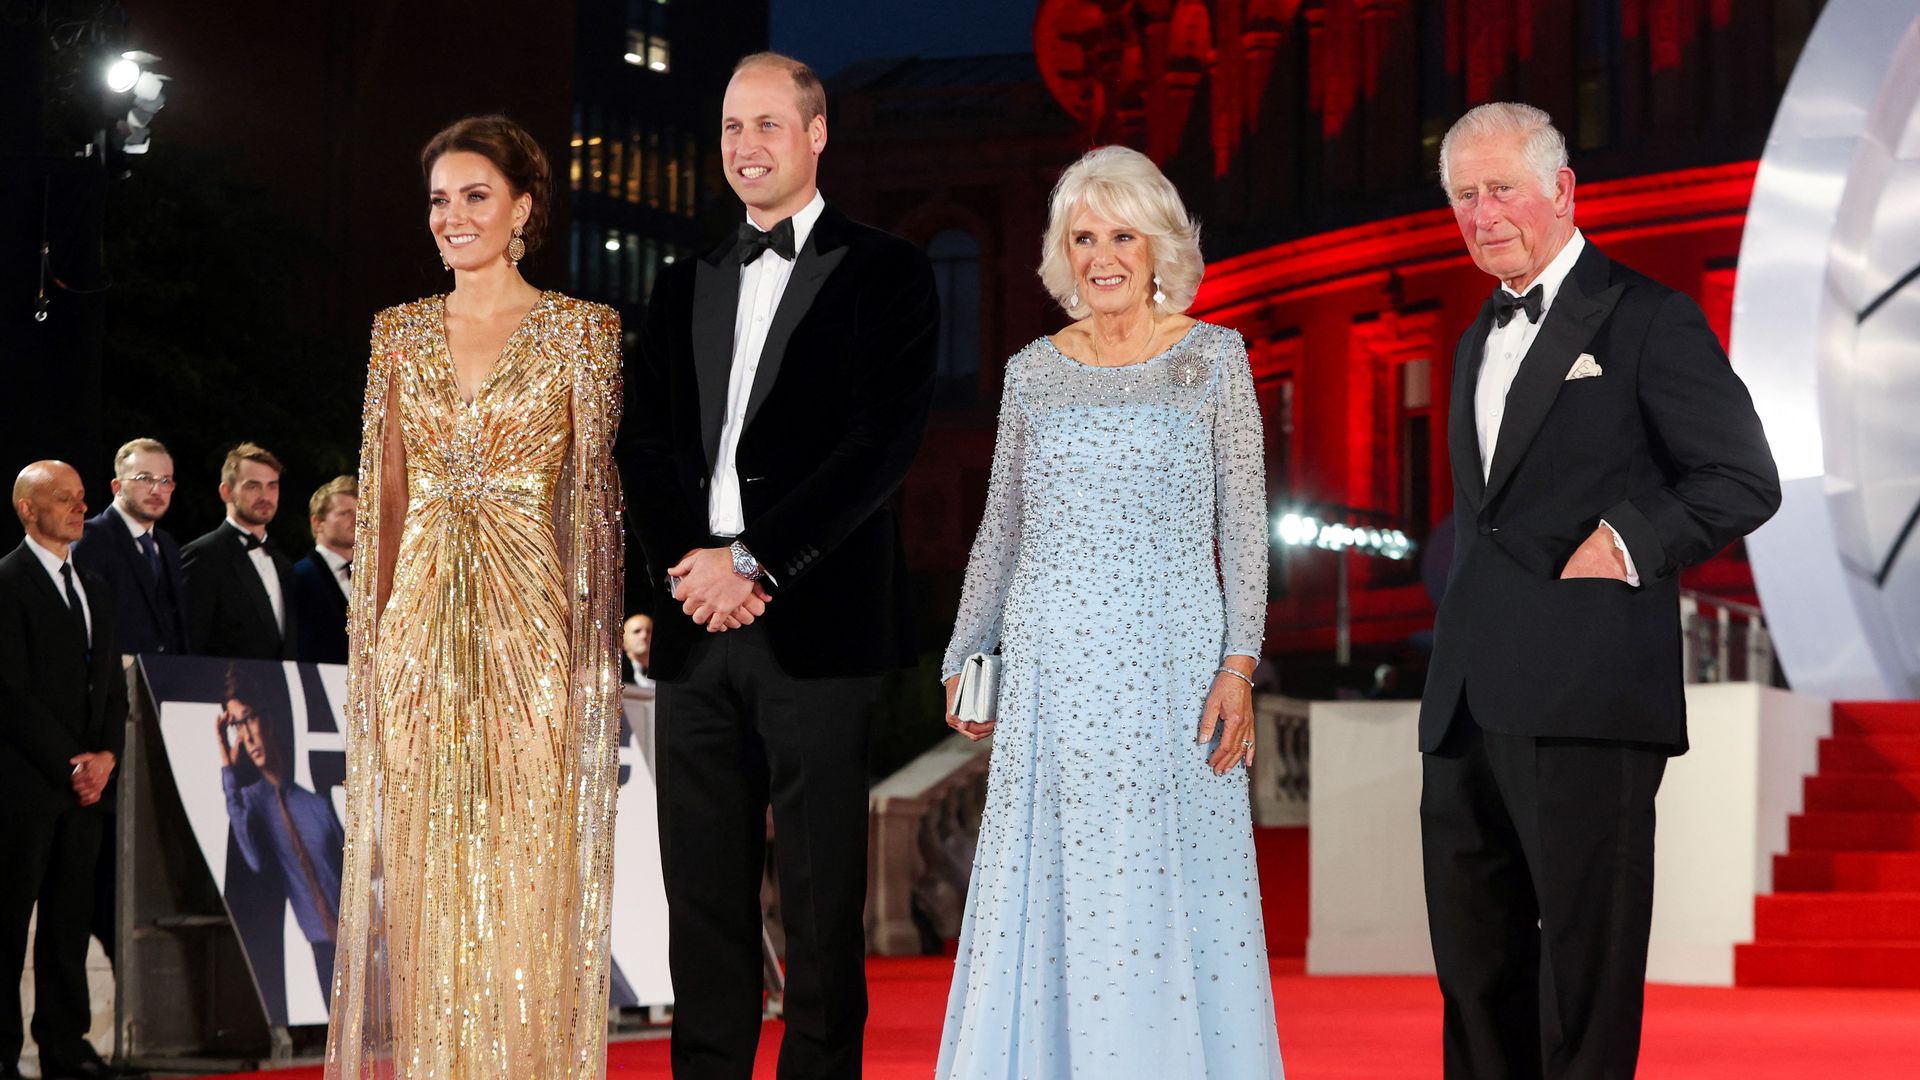 Charles, Camilla, William and Kate on red carpet at James Bond premiere